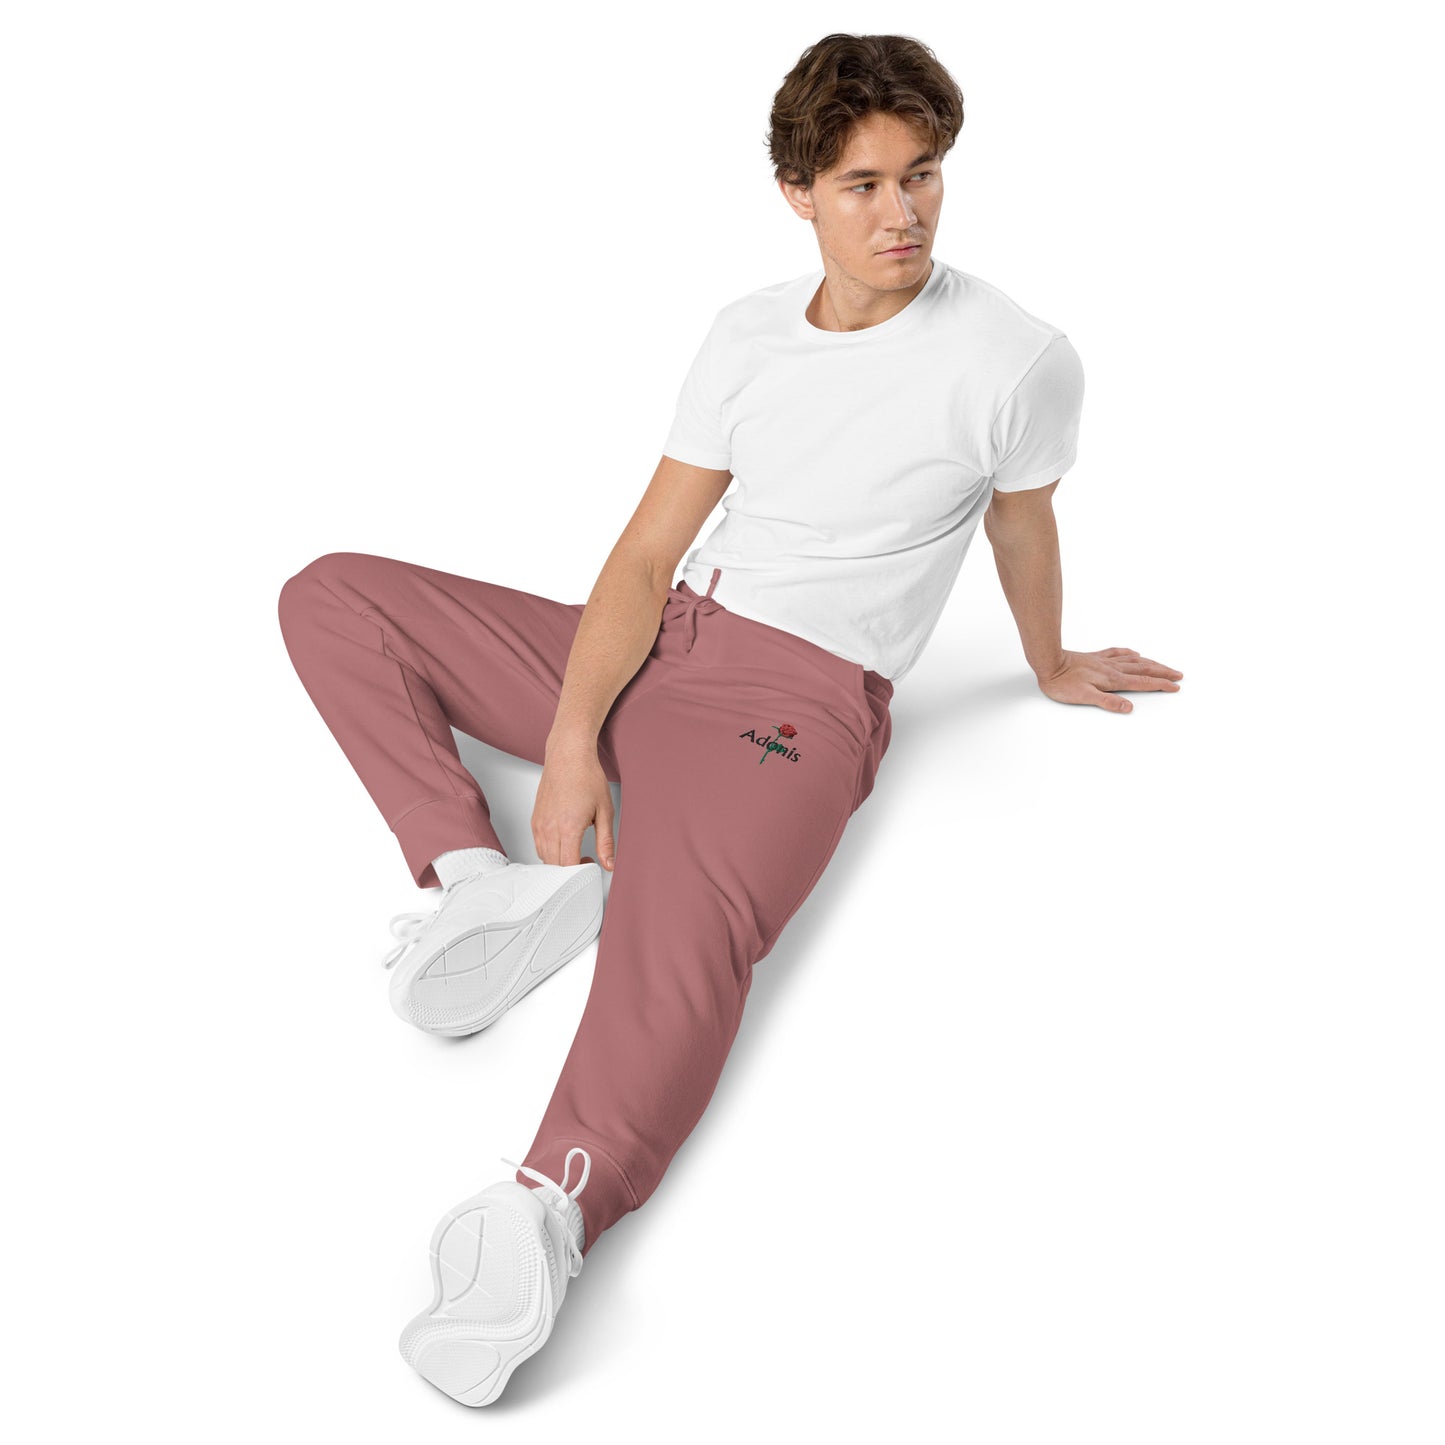 Adonis-Creations - Men's pigment-dyed embroidered sweatpants